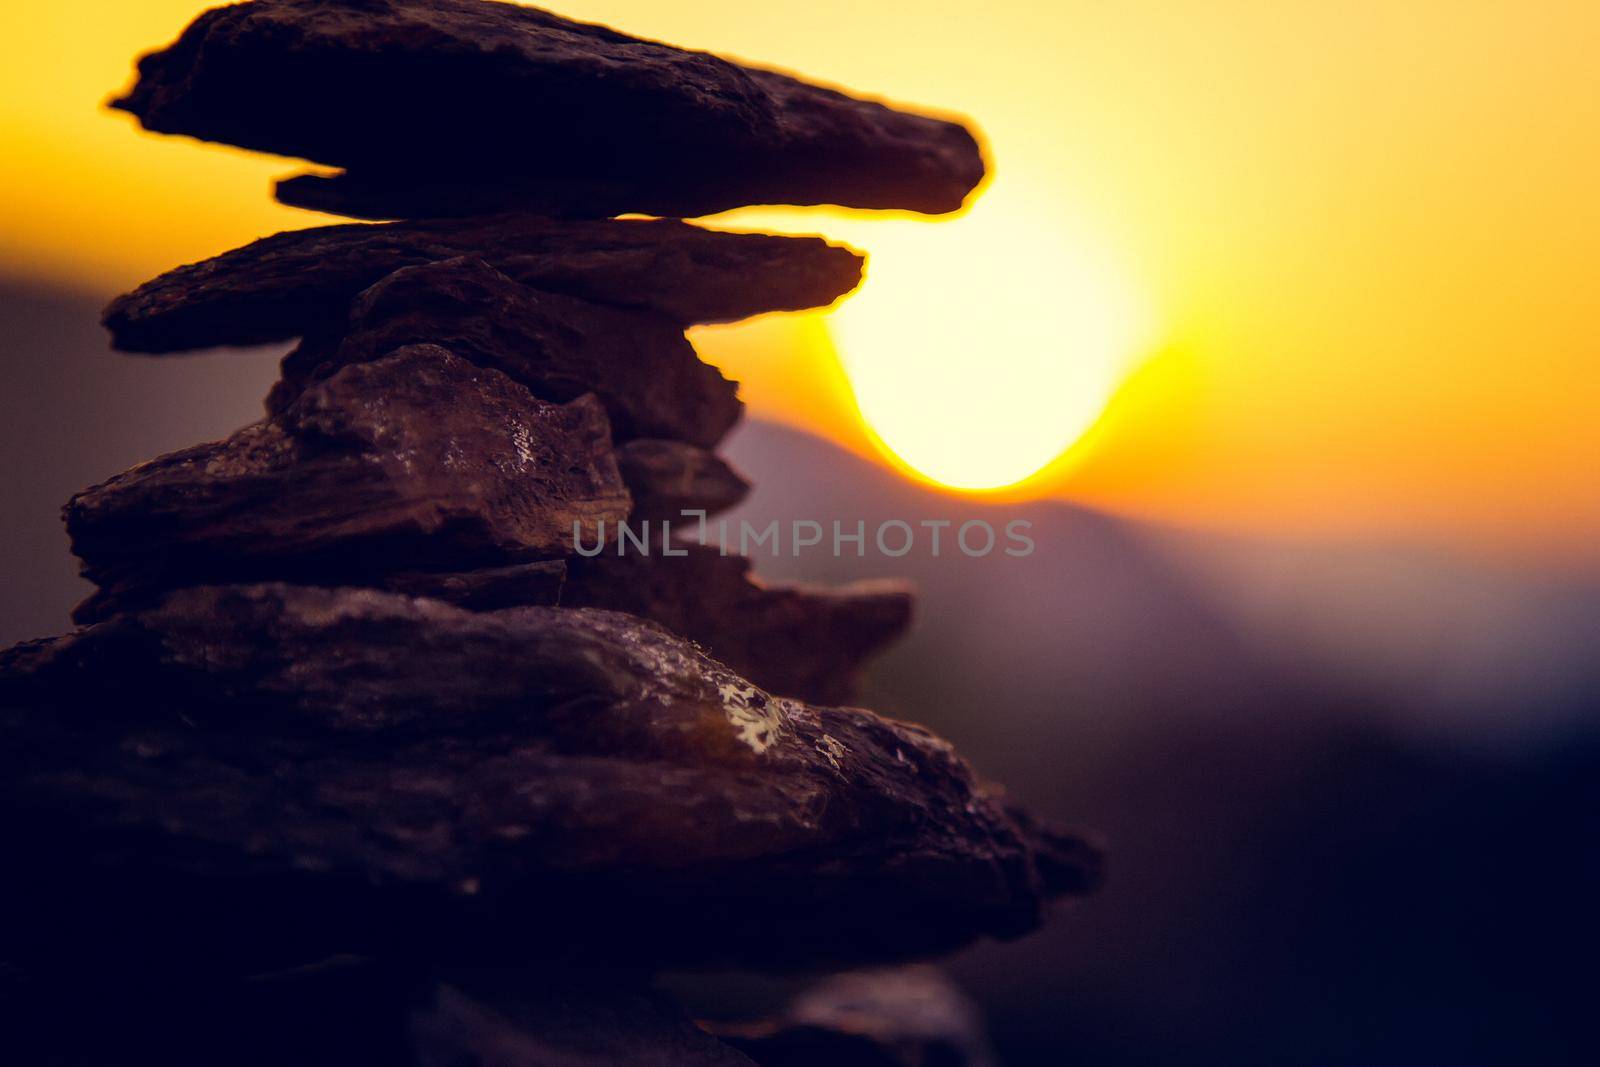 Spa stones balance, colorful summer sky background, silhouette of stacked pebbles and butterfly, beautiful nature, peaceful beach sunset, conceptual image of stable life and harmony